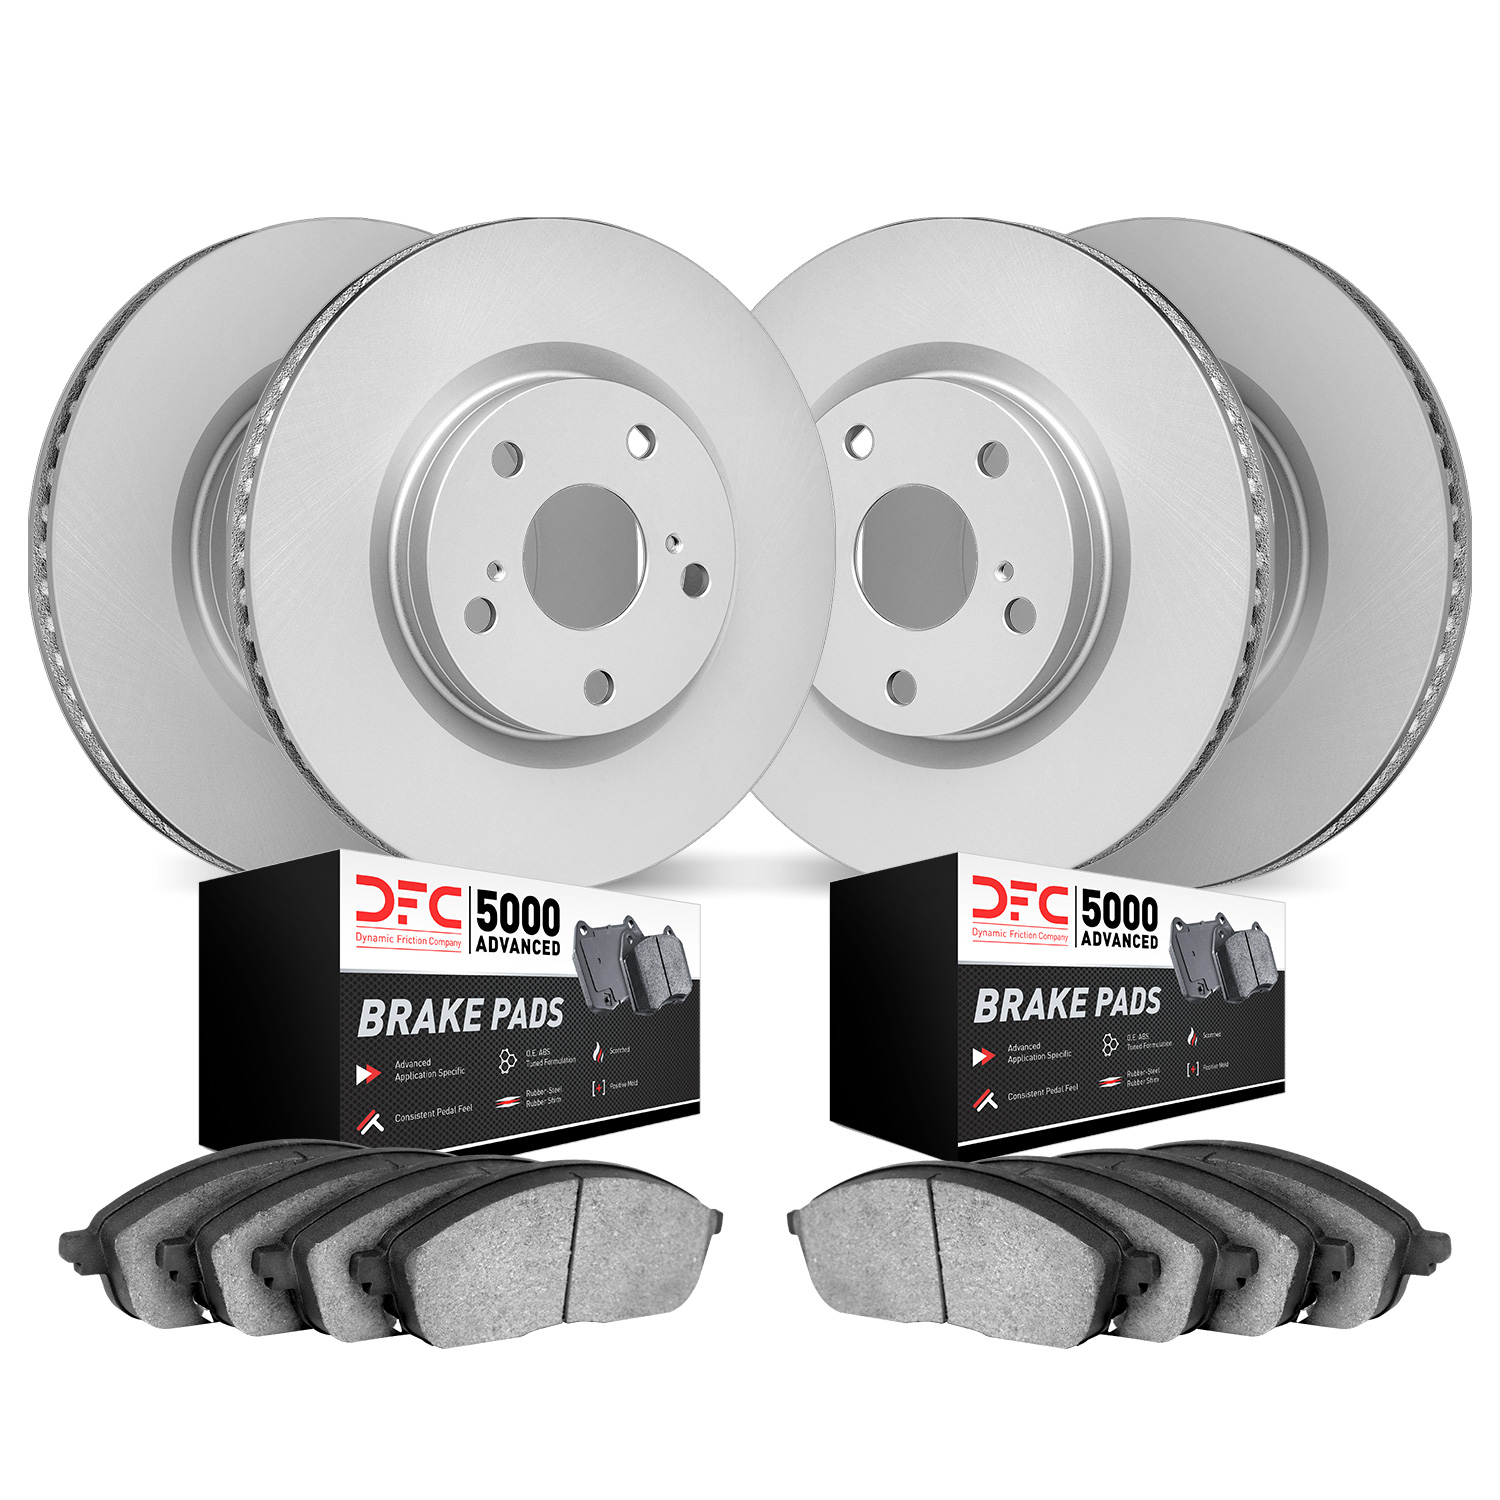 4504-46074 Geospec Brake Rotors w/5000 Advanced Brake Pads Kit, Fits Select GM, Position: Front and Rear